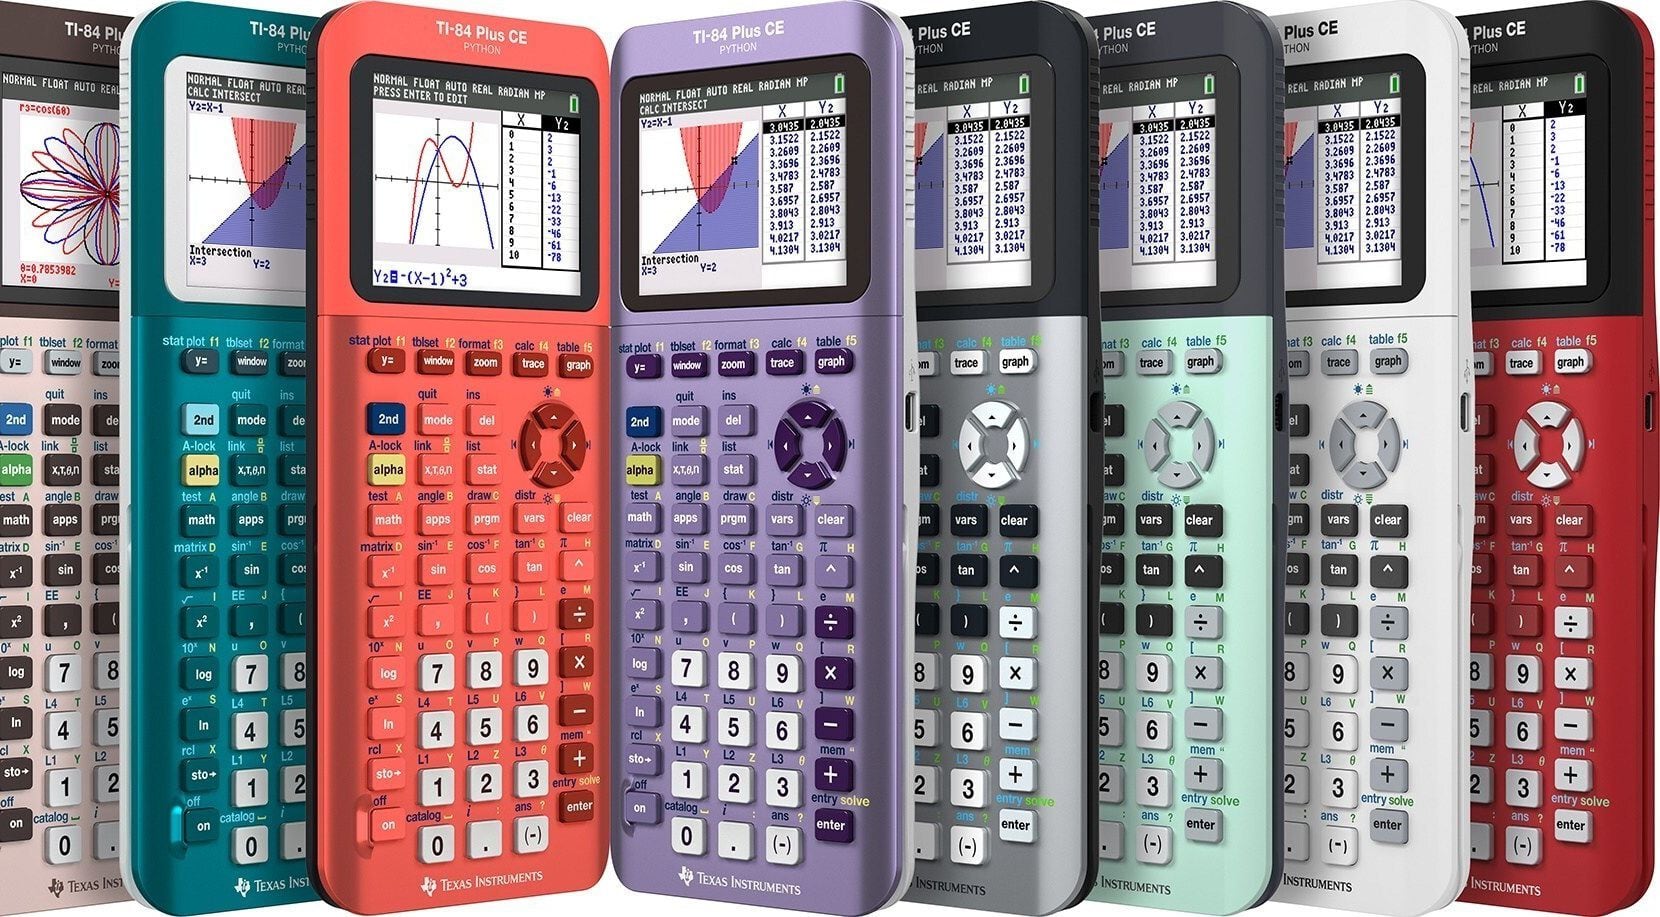 The newest Texas Instruments graphing calculator brings the popular Python programming language to the classroom.